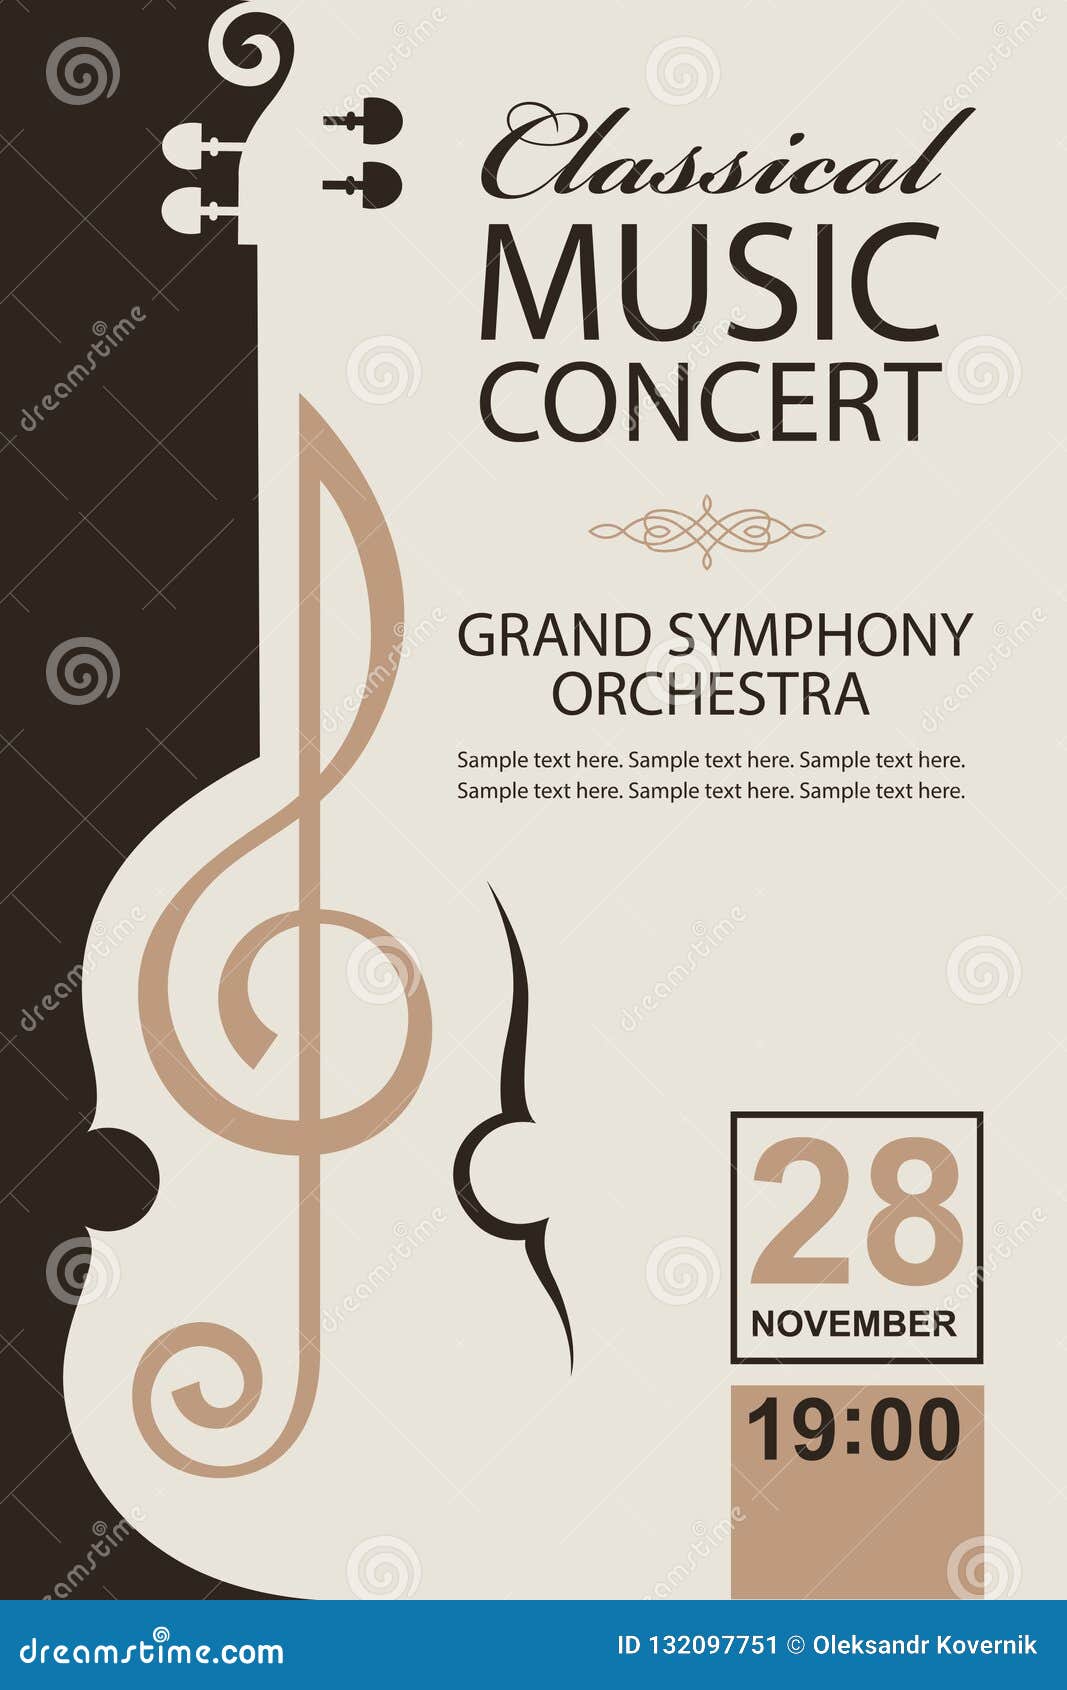 classical concert poster